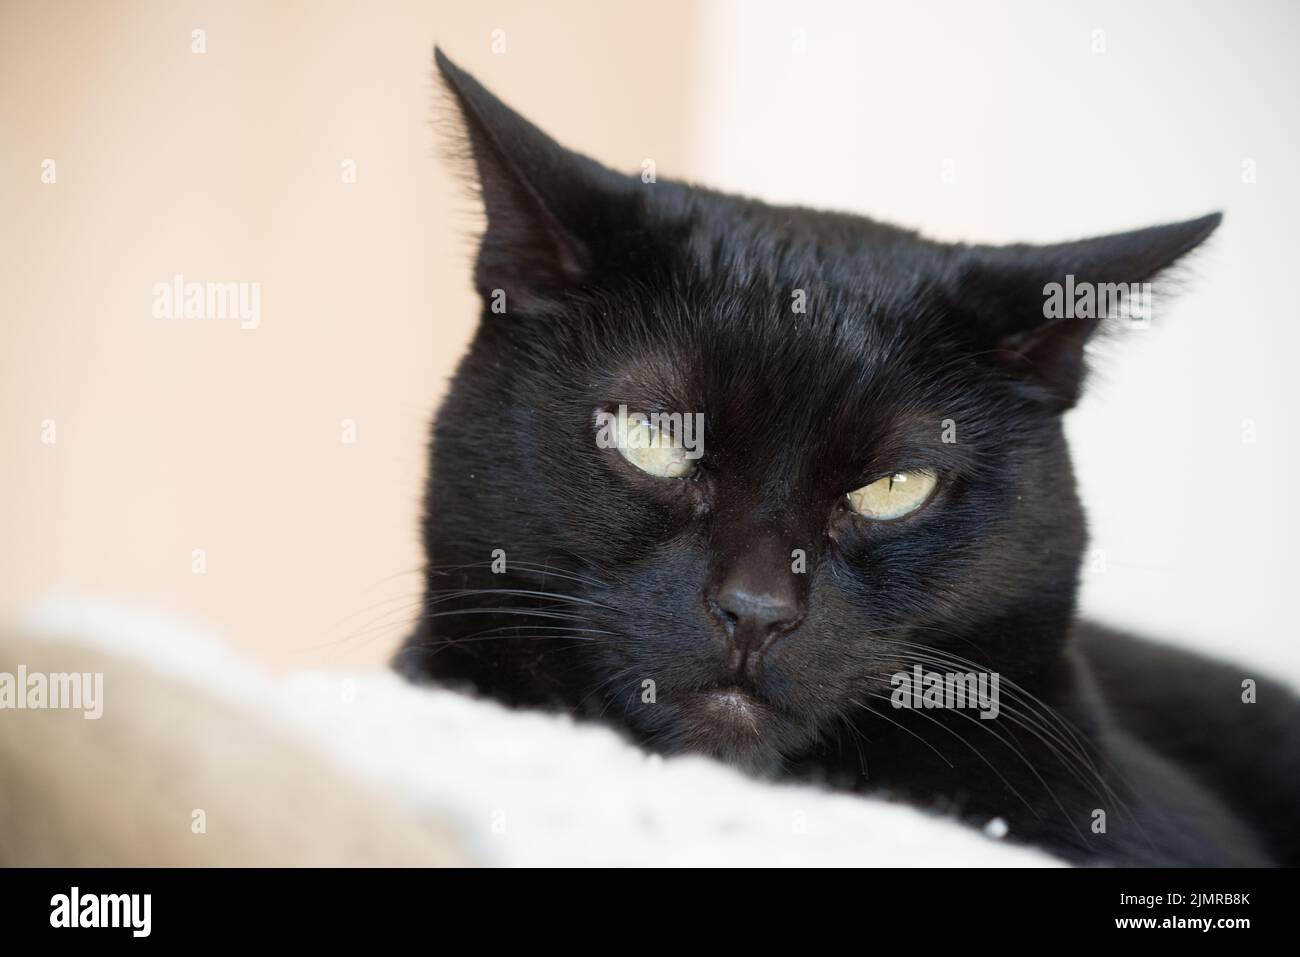 Boo my black Bombay rescue cat gives me an annoyed look to having her picture taken when she wants to take a nap. Stock Photo